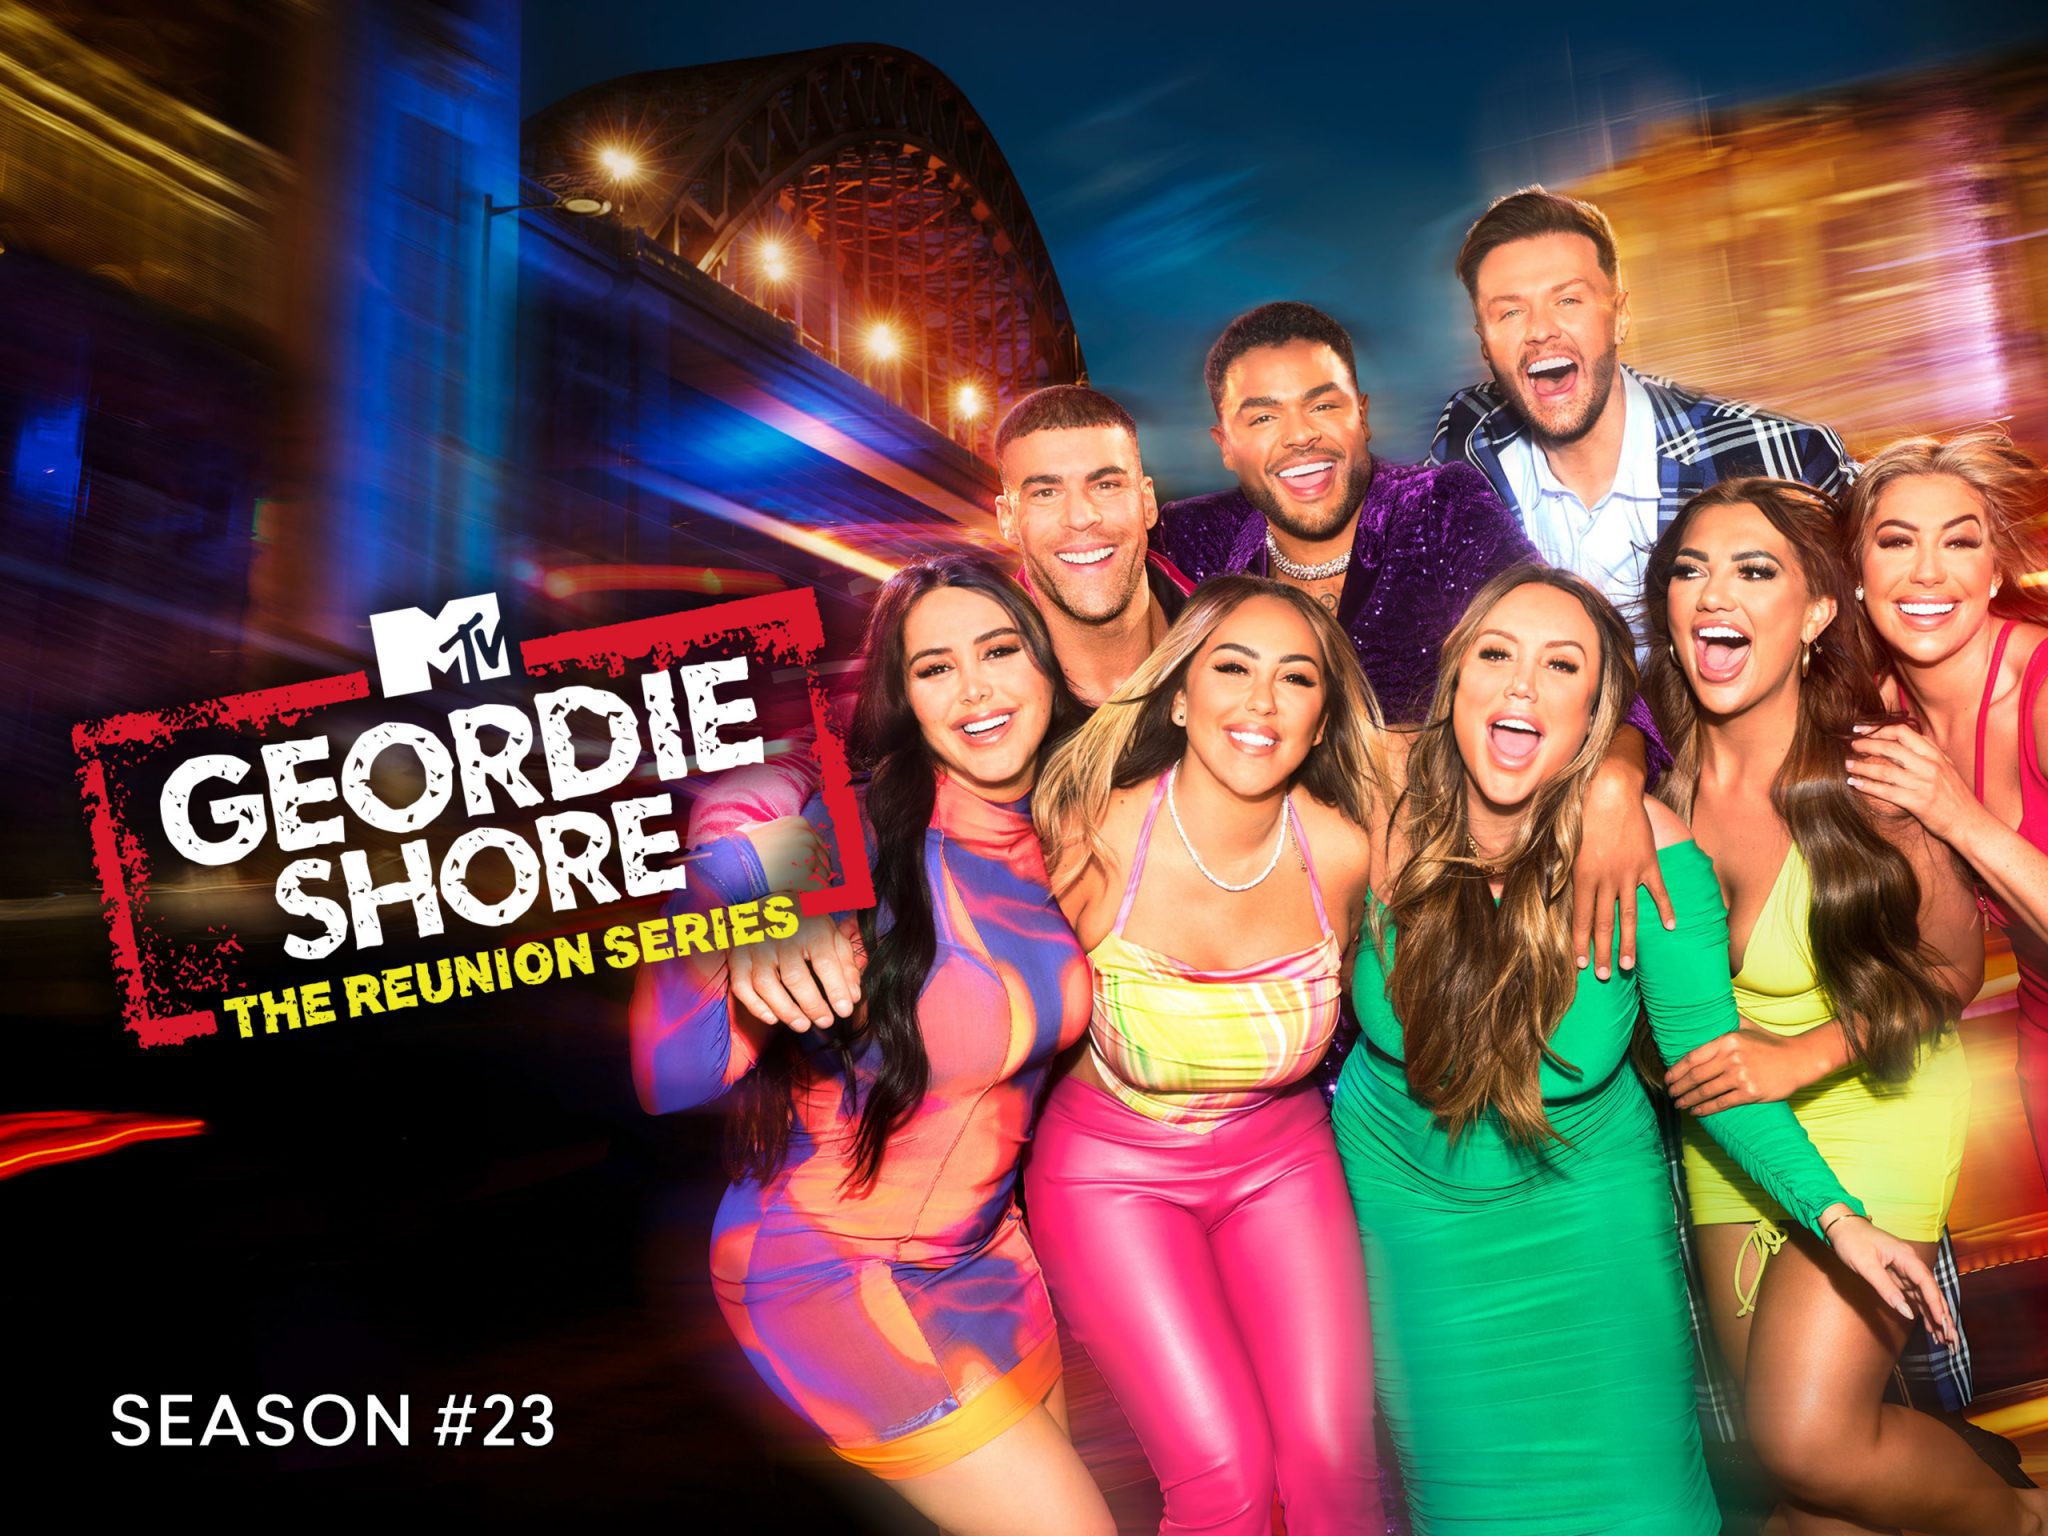 Geordie Shore Season 23 Episode 10 Release Date, Cast and Streaming